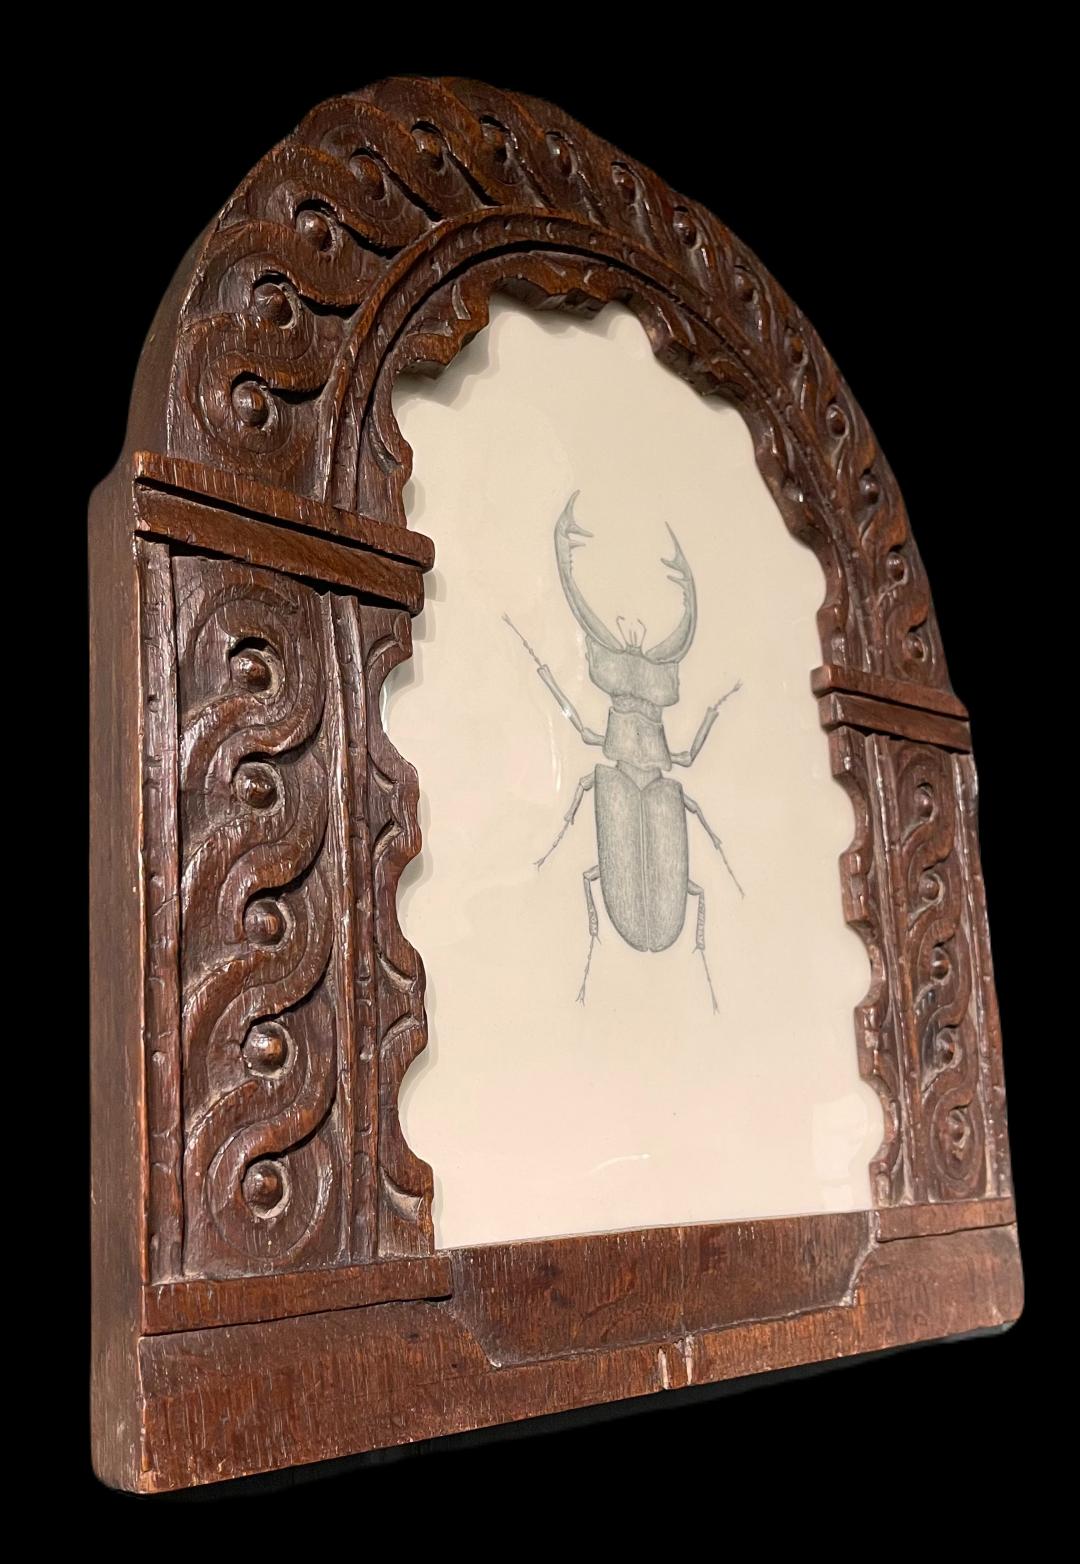 Stag beetle, presented in an English, 17th Century hand-carved oak frame - Realist Mixed Media Art by Tom Rooth